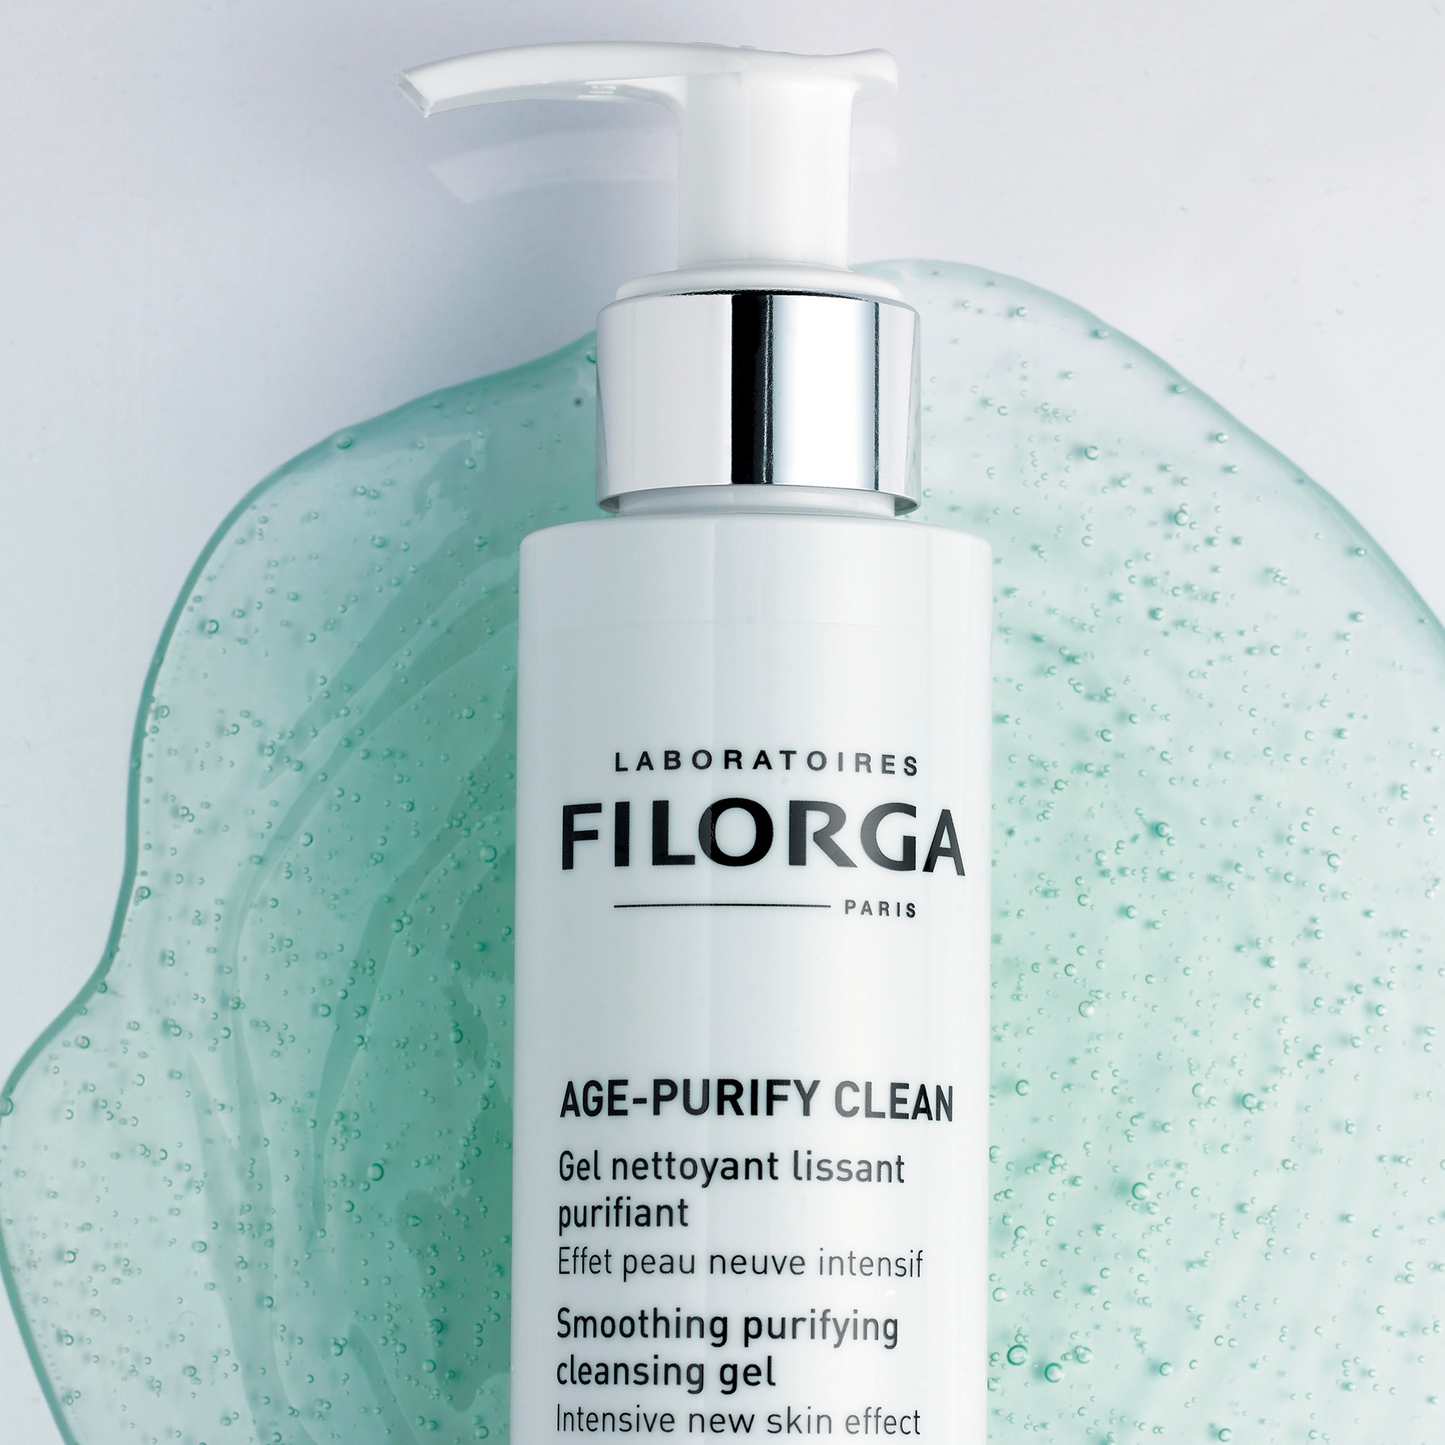 AGE-PURIFY CLEAN  pump bottle with green cleanser behind it.